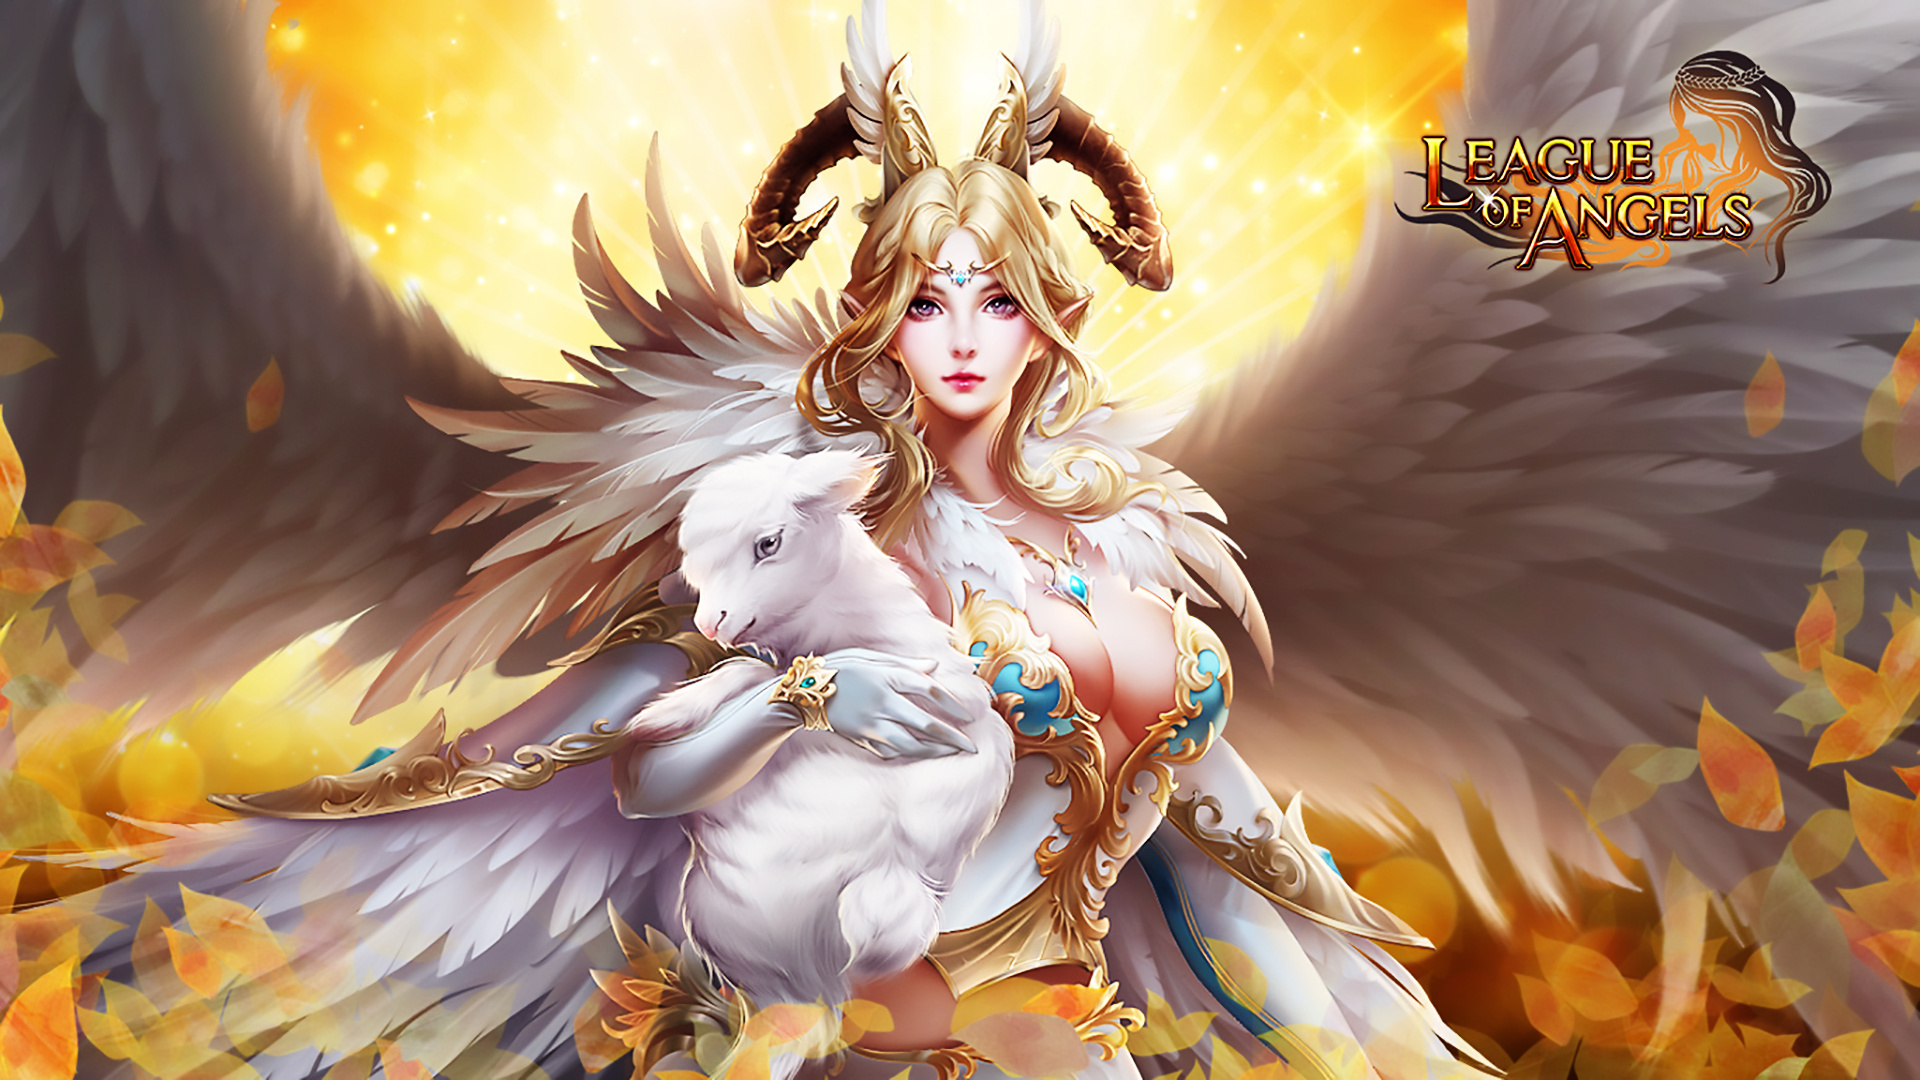 League of Angels, alice wallpapers, ethereal games, mystical charm, 1920x1080 Full HD Desktop